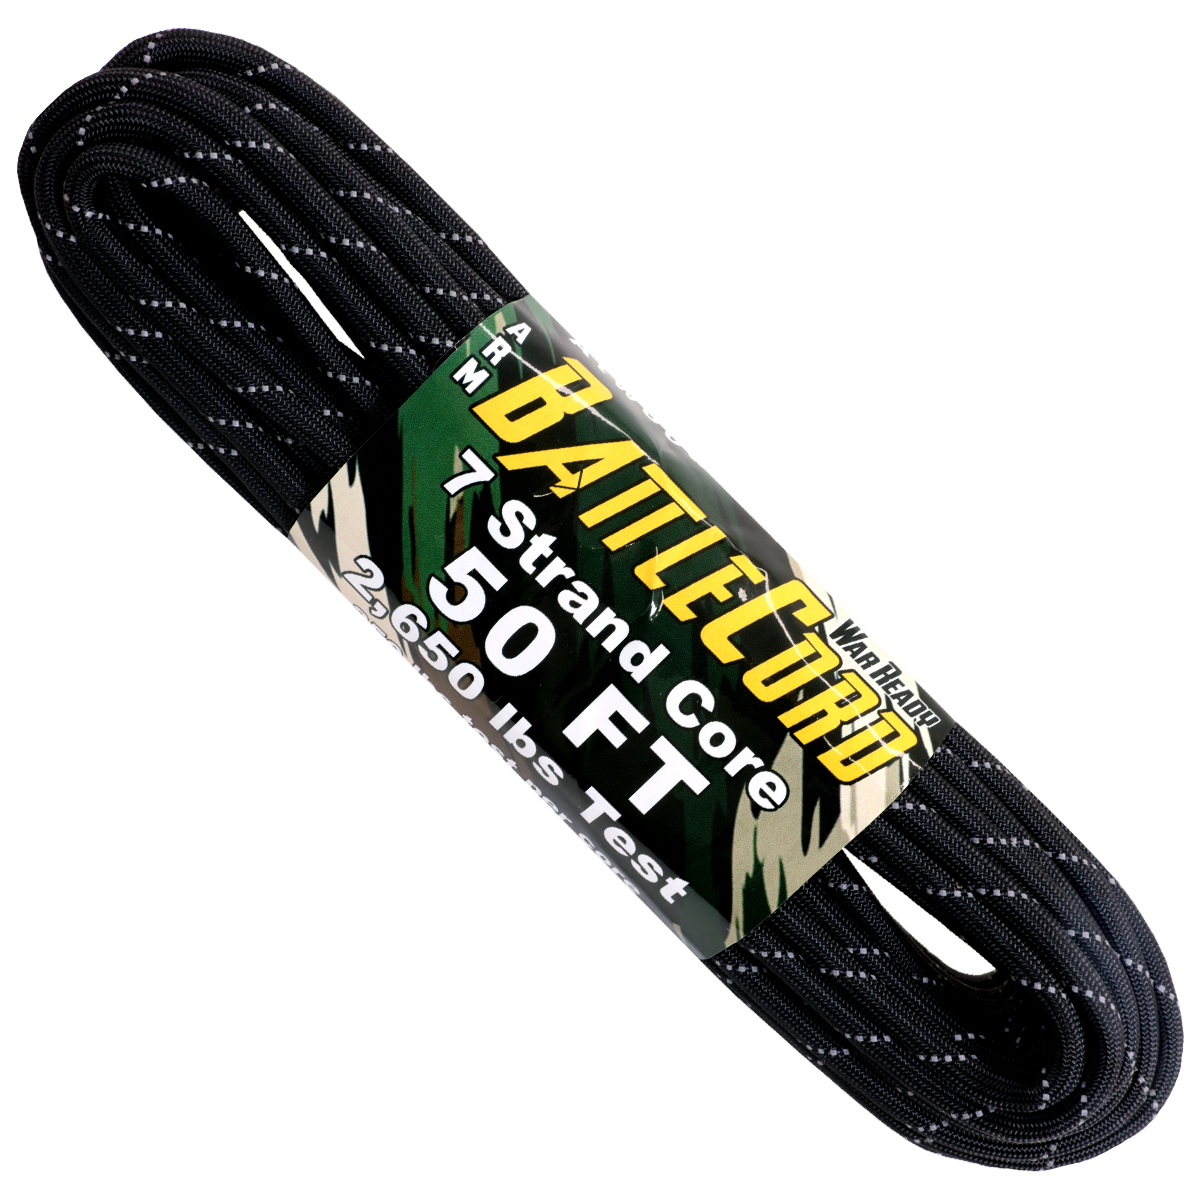 5.6mm Battle Cord Reflective - Black – Atwood Rope MFG